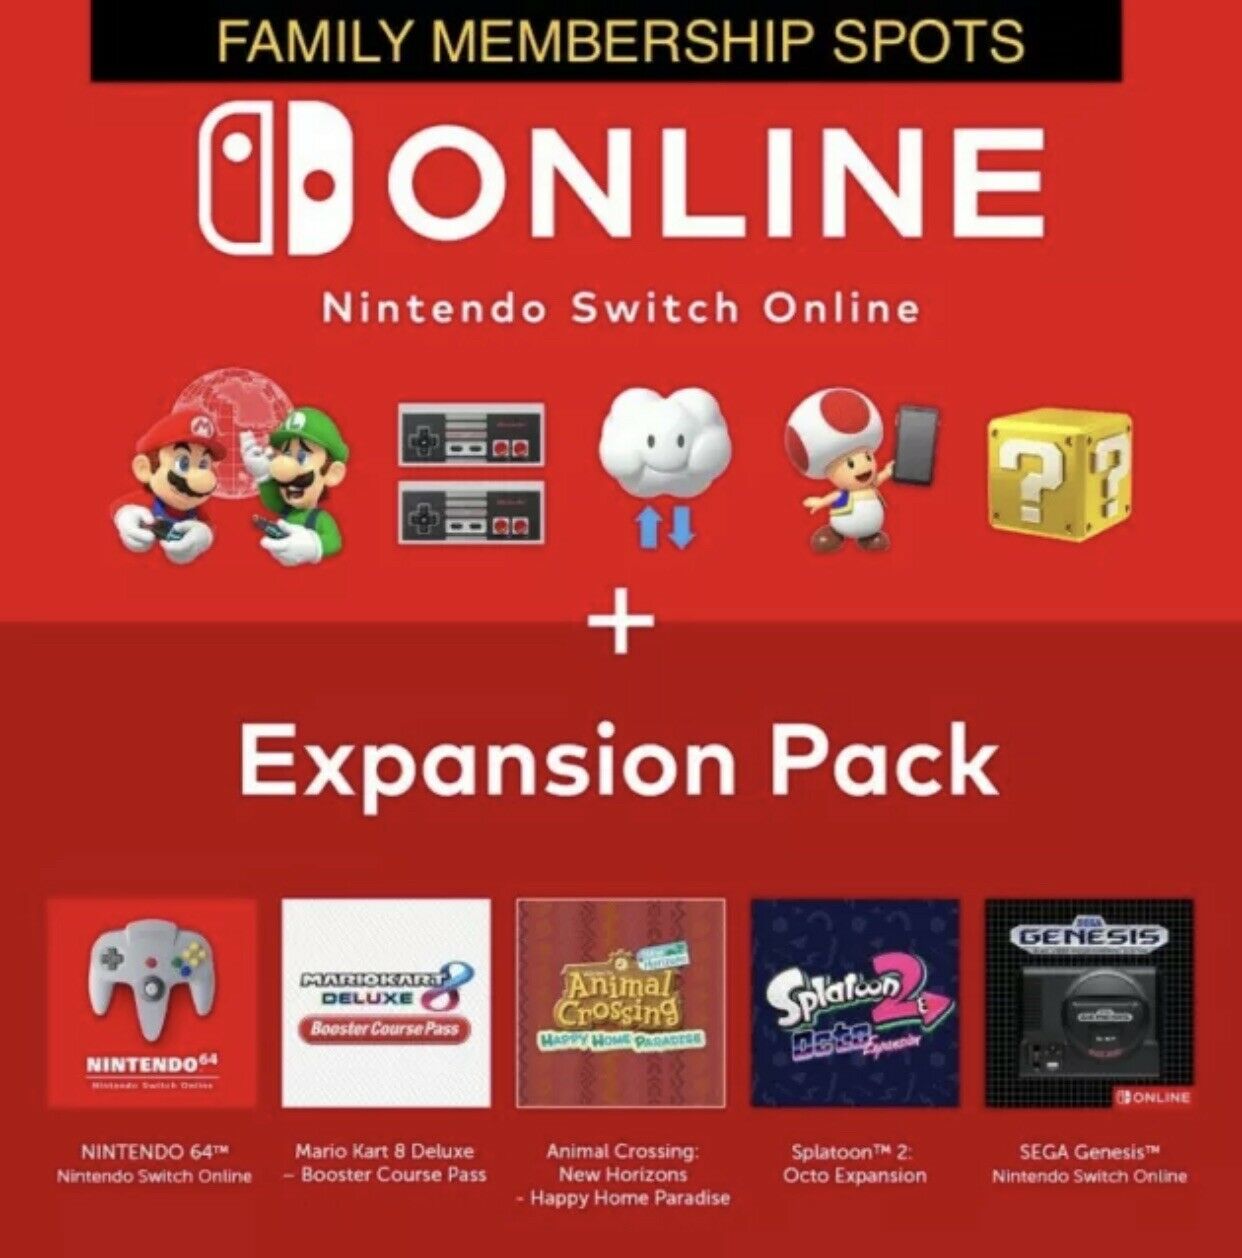 12 Months Nintendo Switch Online Family Membership + Expansion Pack - 1 Spot